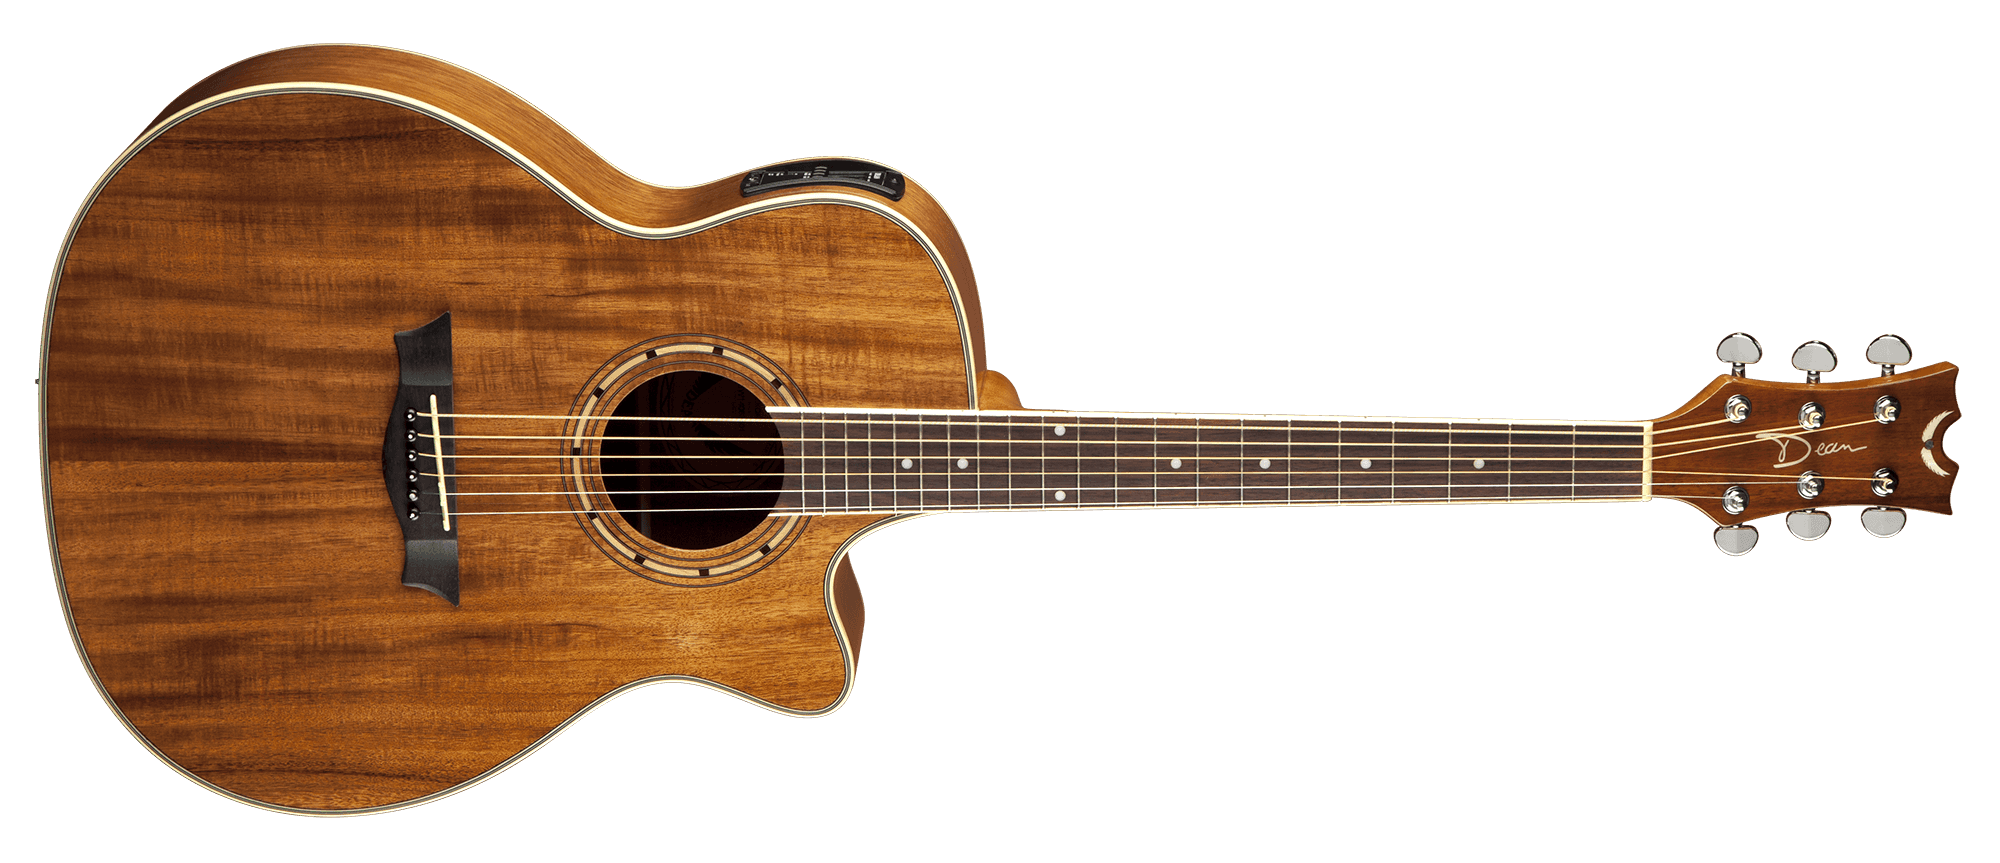 Wooden Guitar PNG Image